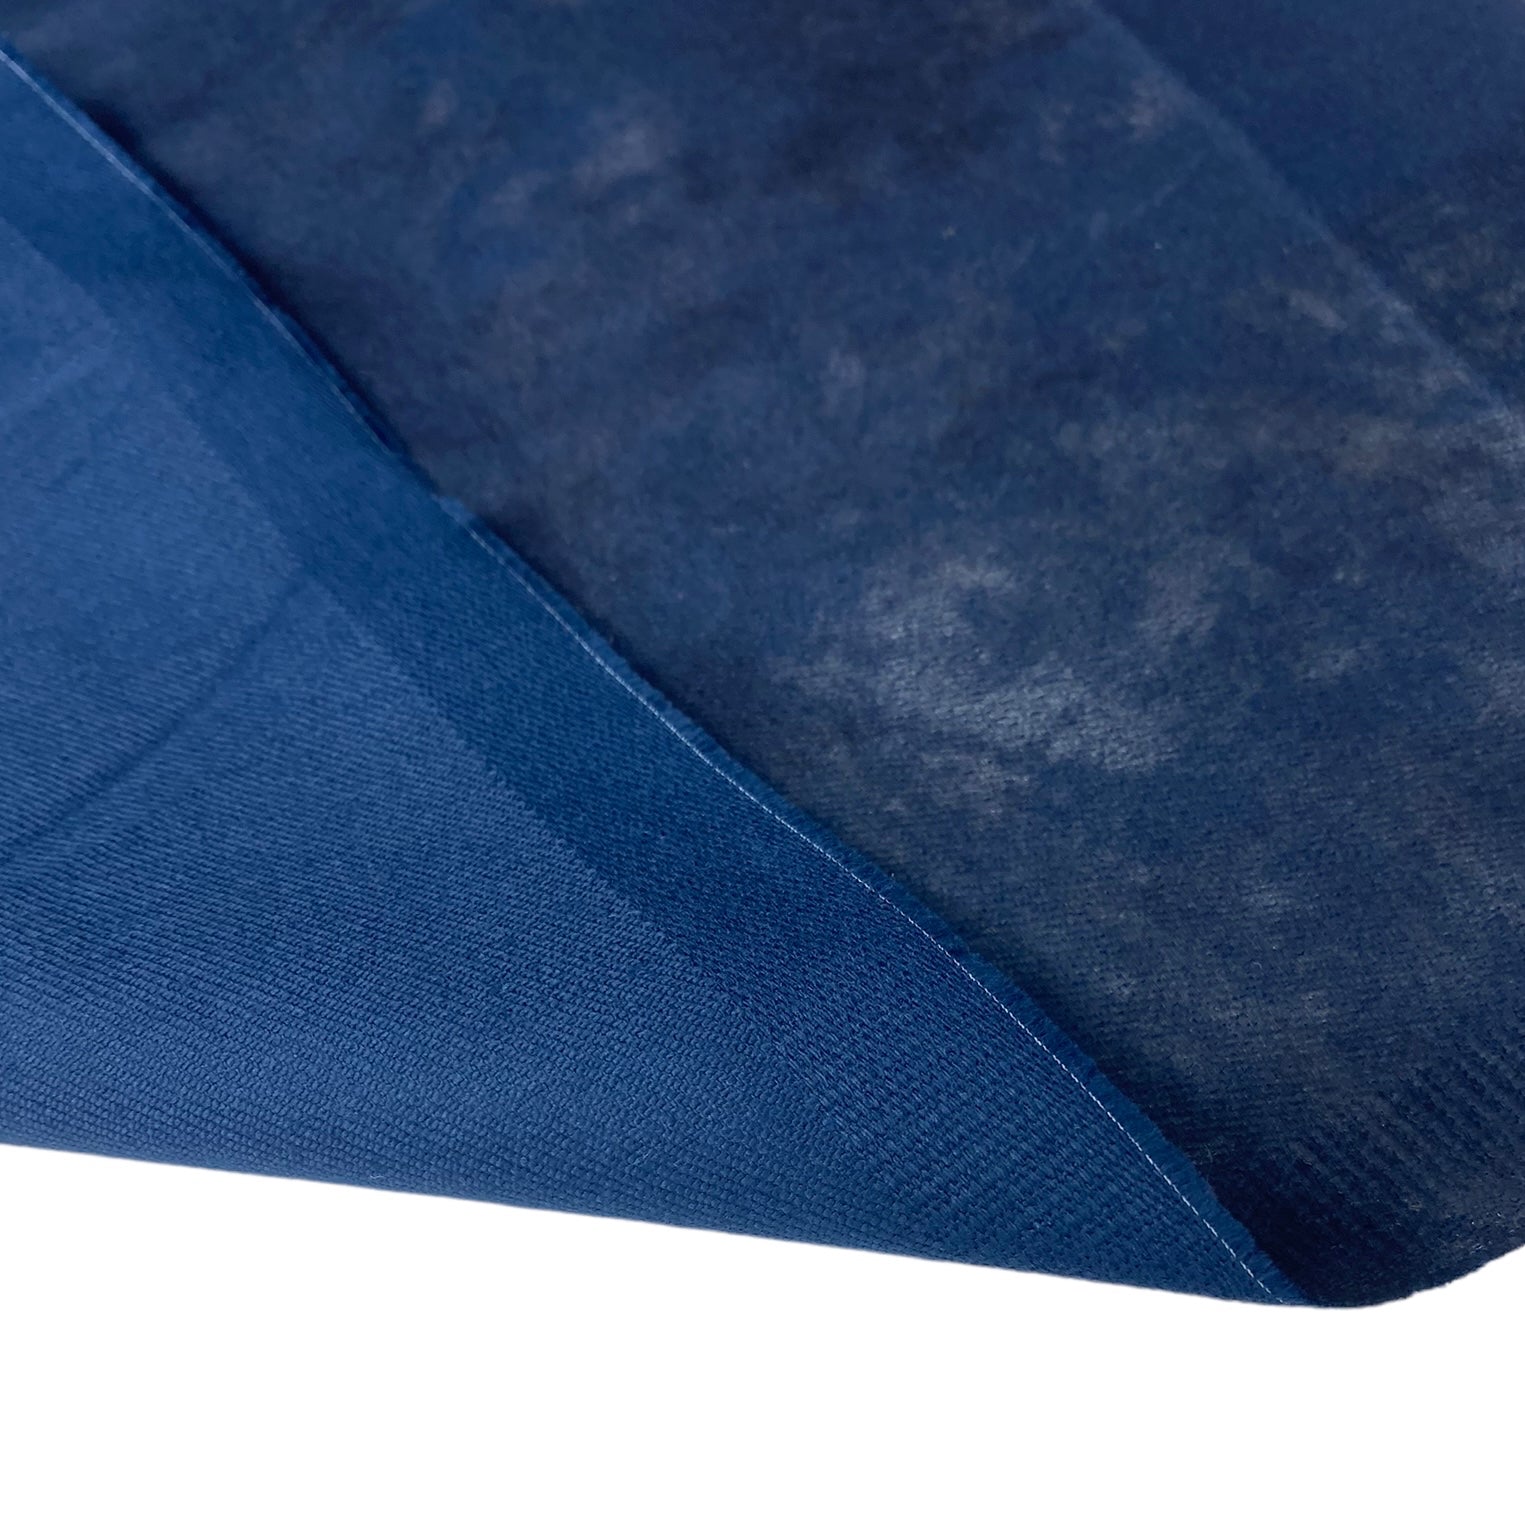 Distressed Coated Stretch Twill Canvas - Navy